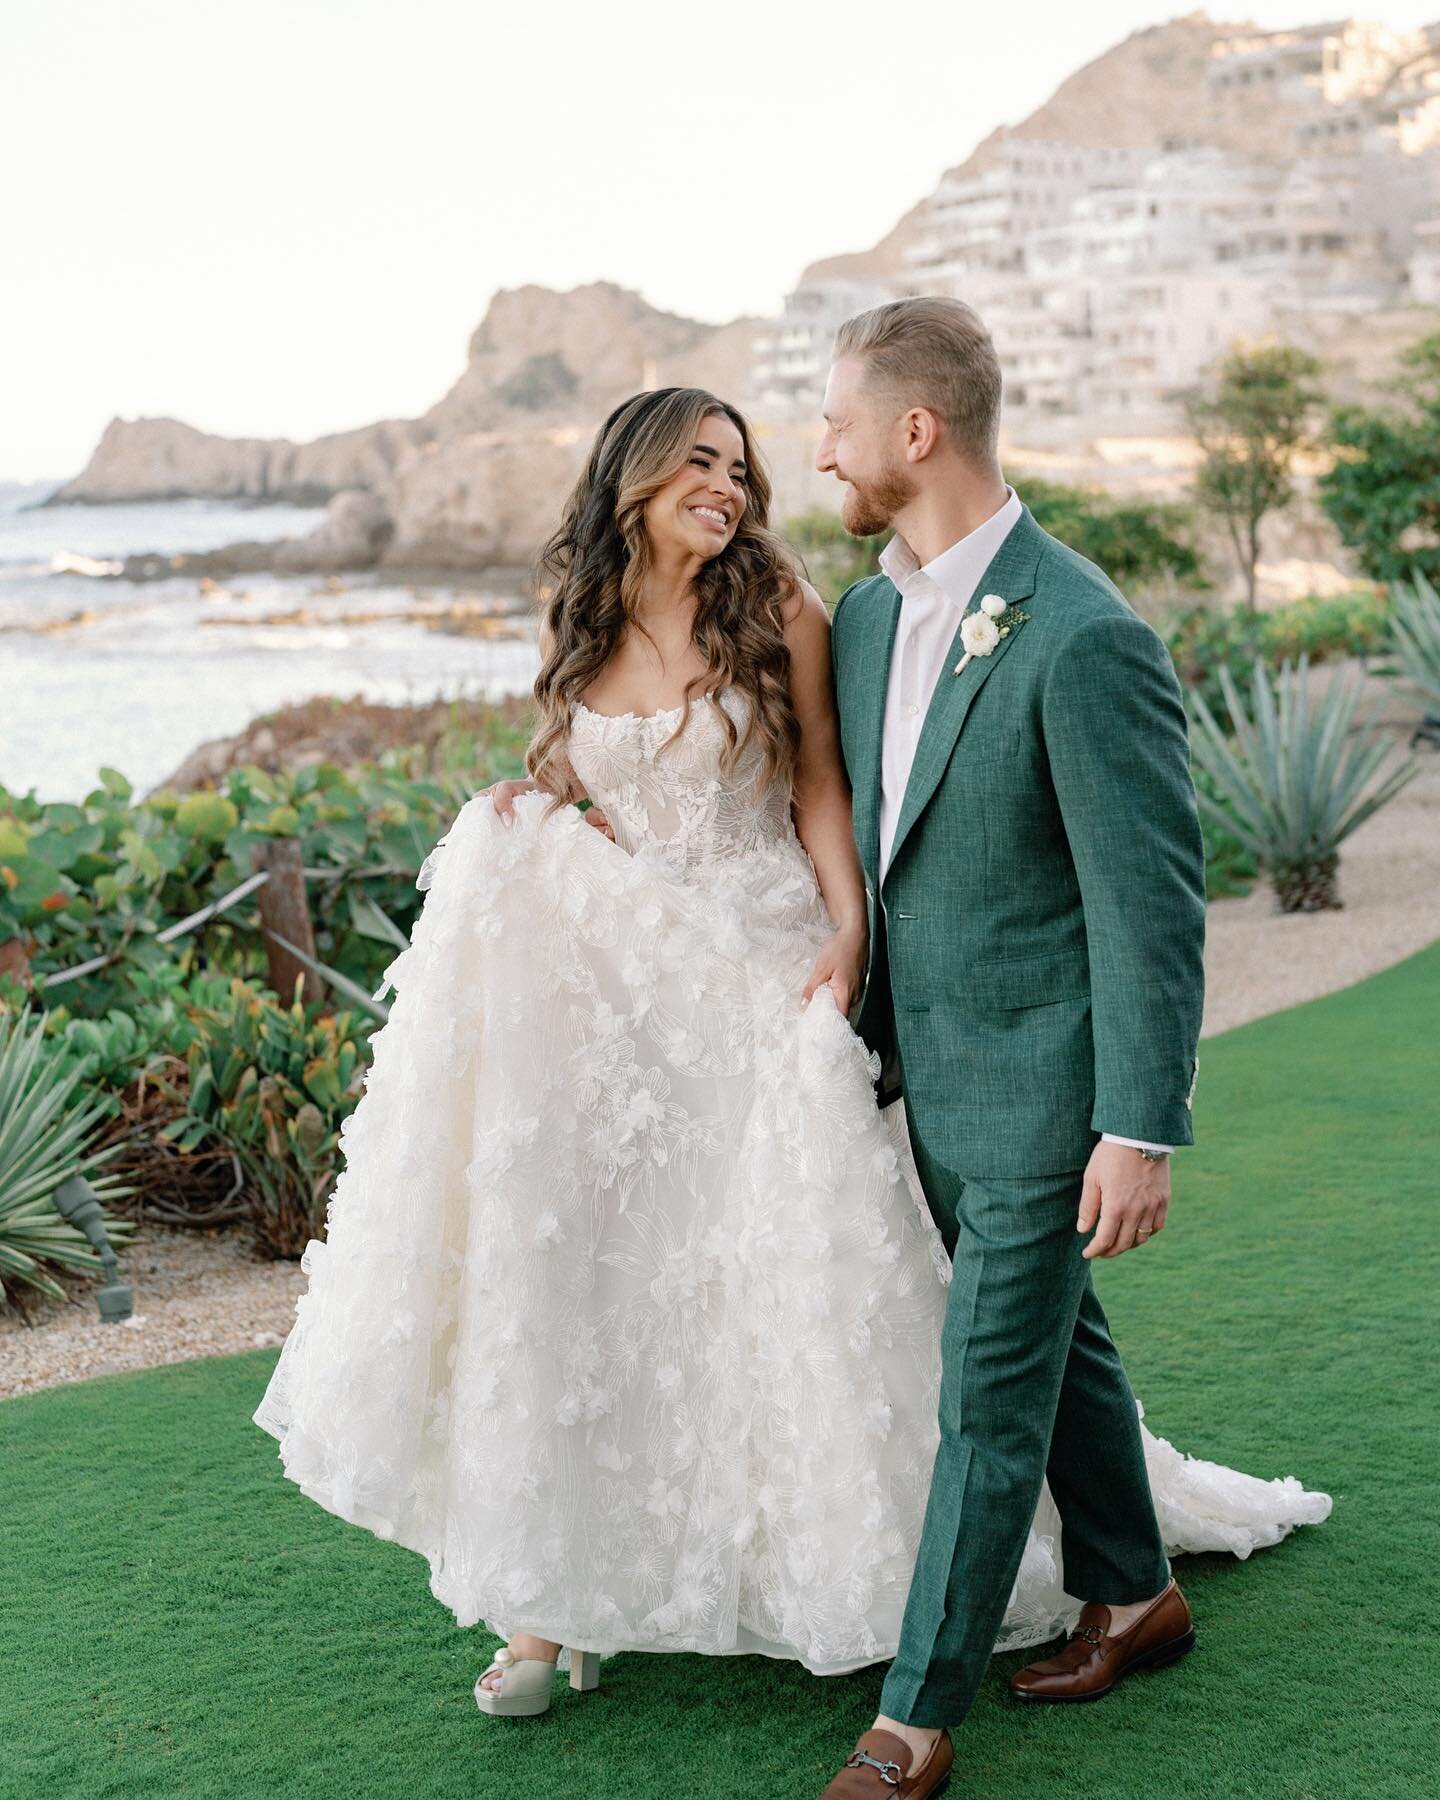 Magic on the dance floor in Mexico, brought to you by margaritas, music and one insanely fun couple and their guests. I&rsquo;m deeply grateful to have been a part of Amanda and Matt&rsquo;s destination wedding weekend in Cabo. I could say endless th